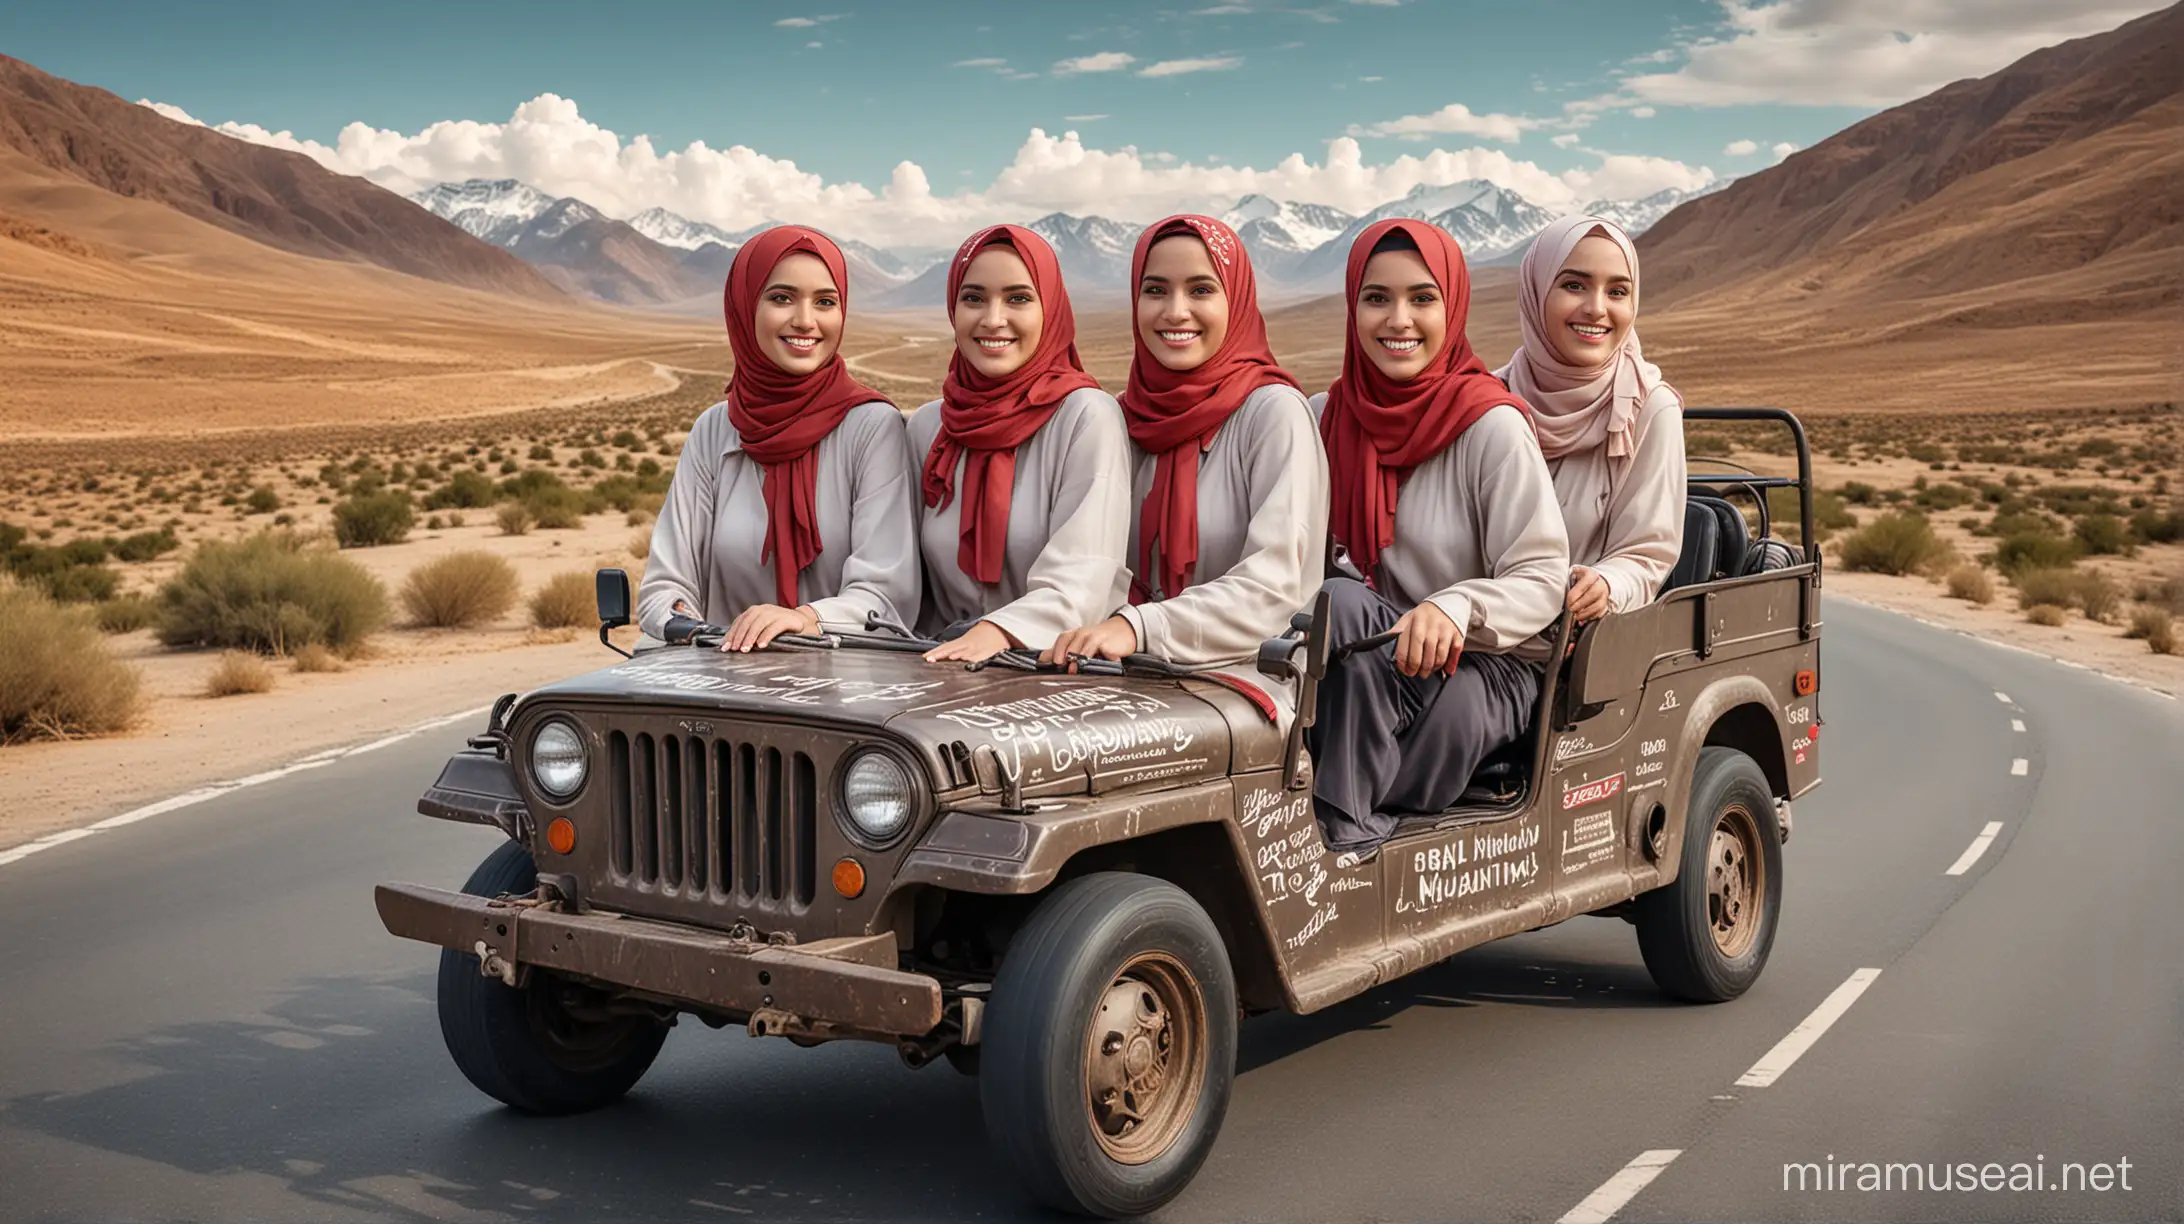 long shoot, 4D caricature , real face of 3 beautiful women, all wearing long hijabs, smiling sweetly, riding an old jeep, smooth asphalt road background, winding road, beautiful mountain views, in the sky there is writing typography ( AYO MUDIK )
(red font) lightroom effects, hyperrealistic, real faces. Ultra HDR resolution, true and strong colors.